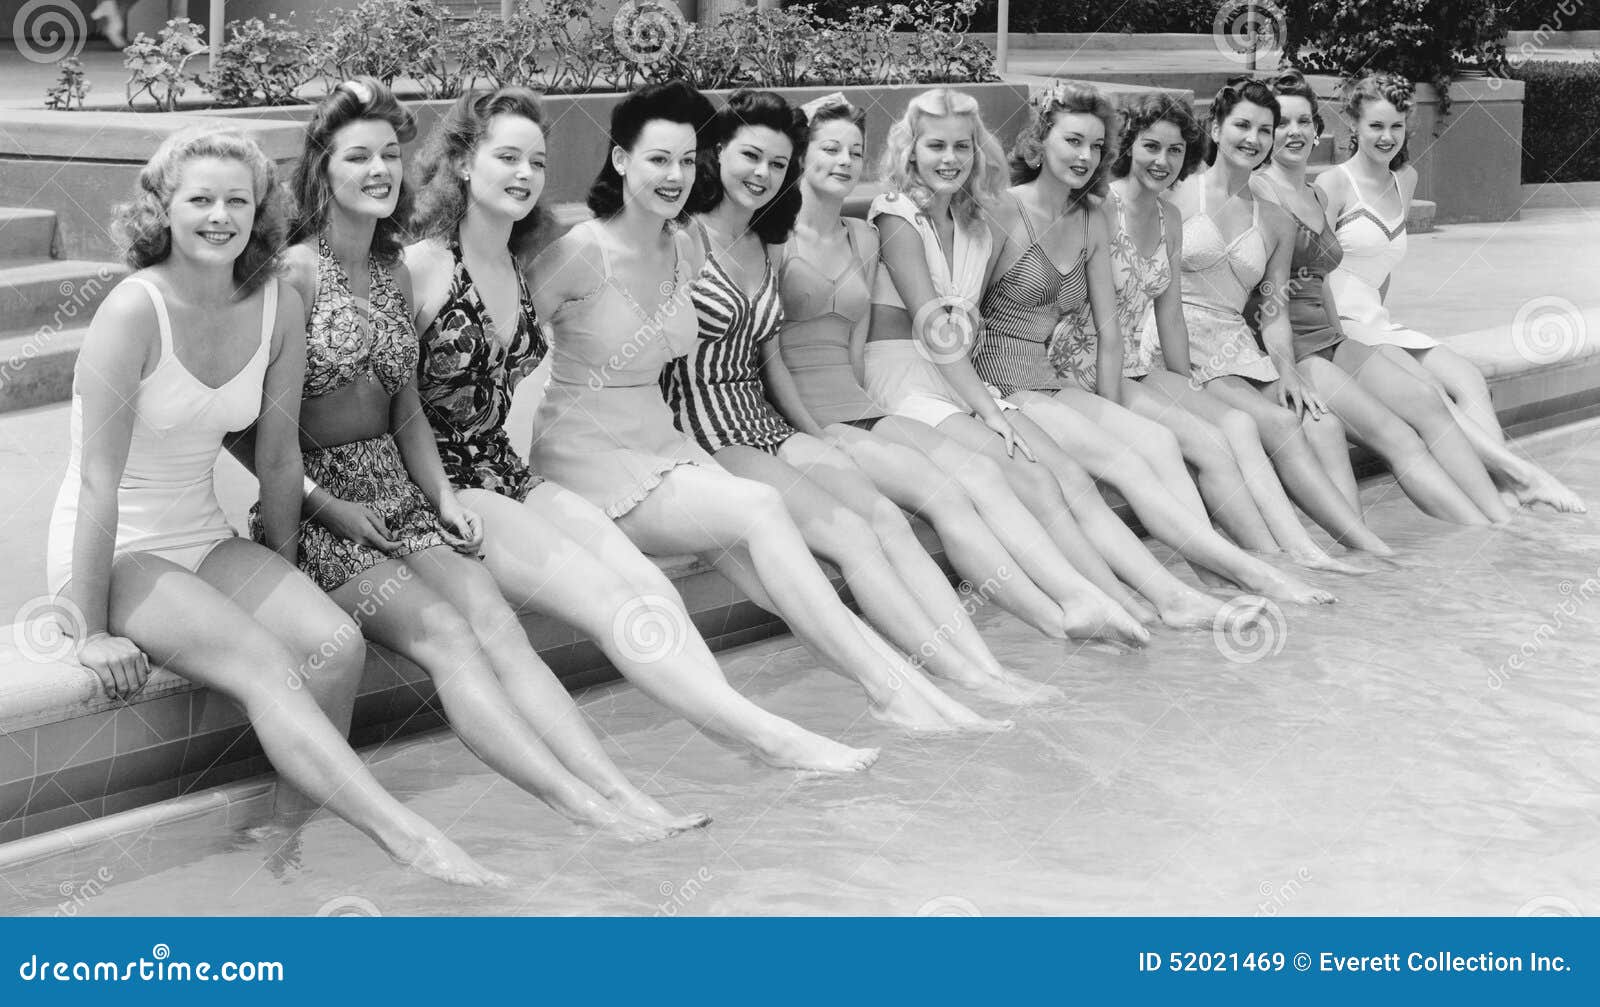 group of women sitting in a row at the pool side